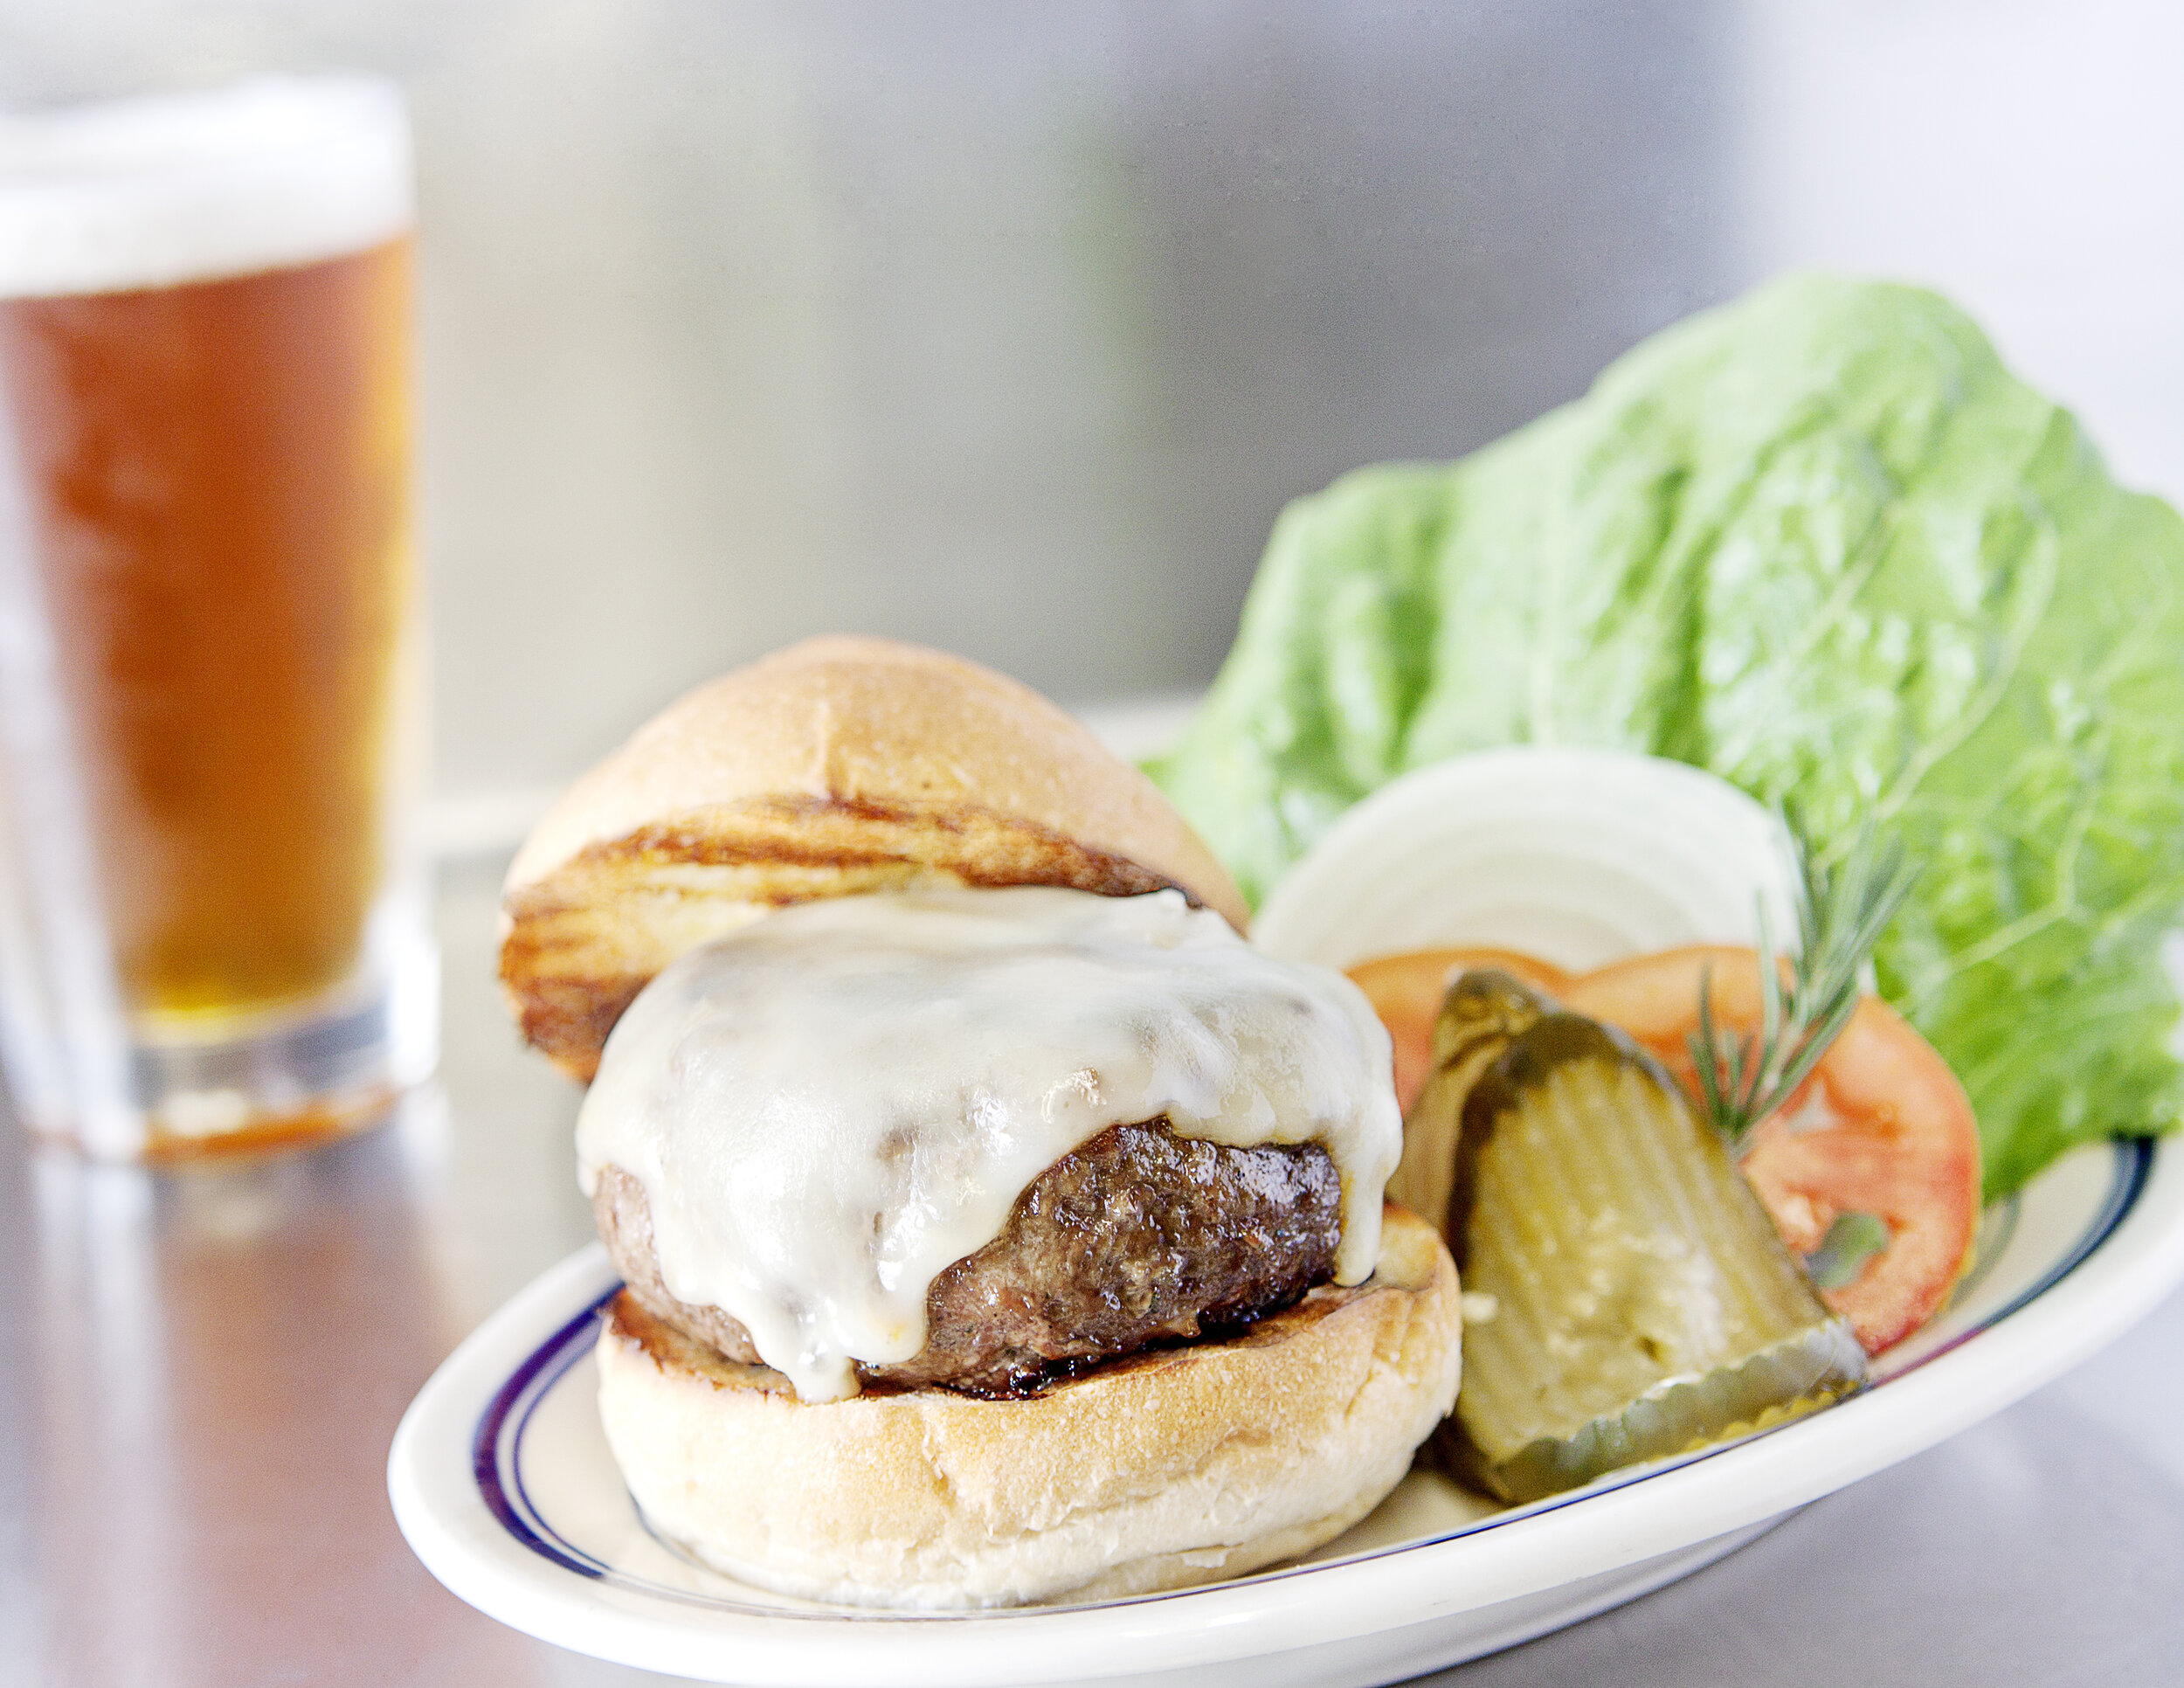 A burger and beer